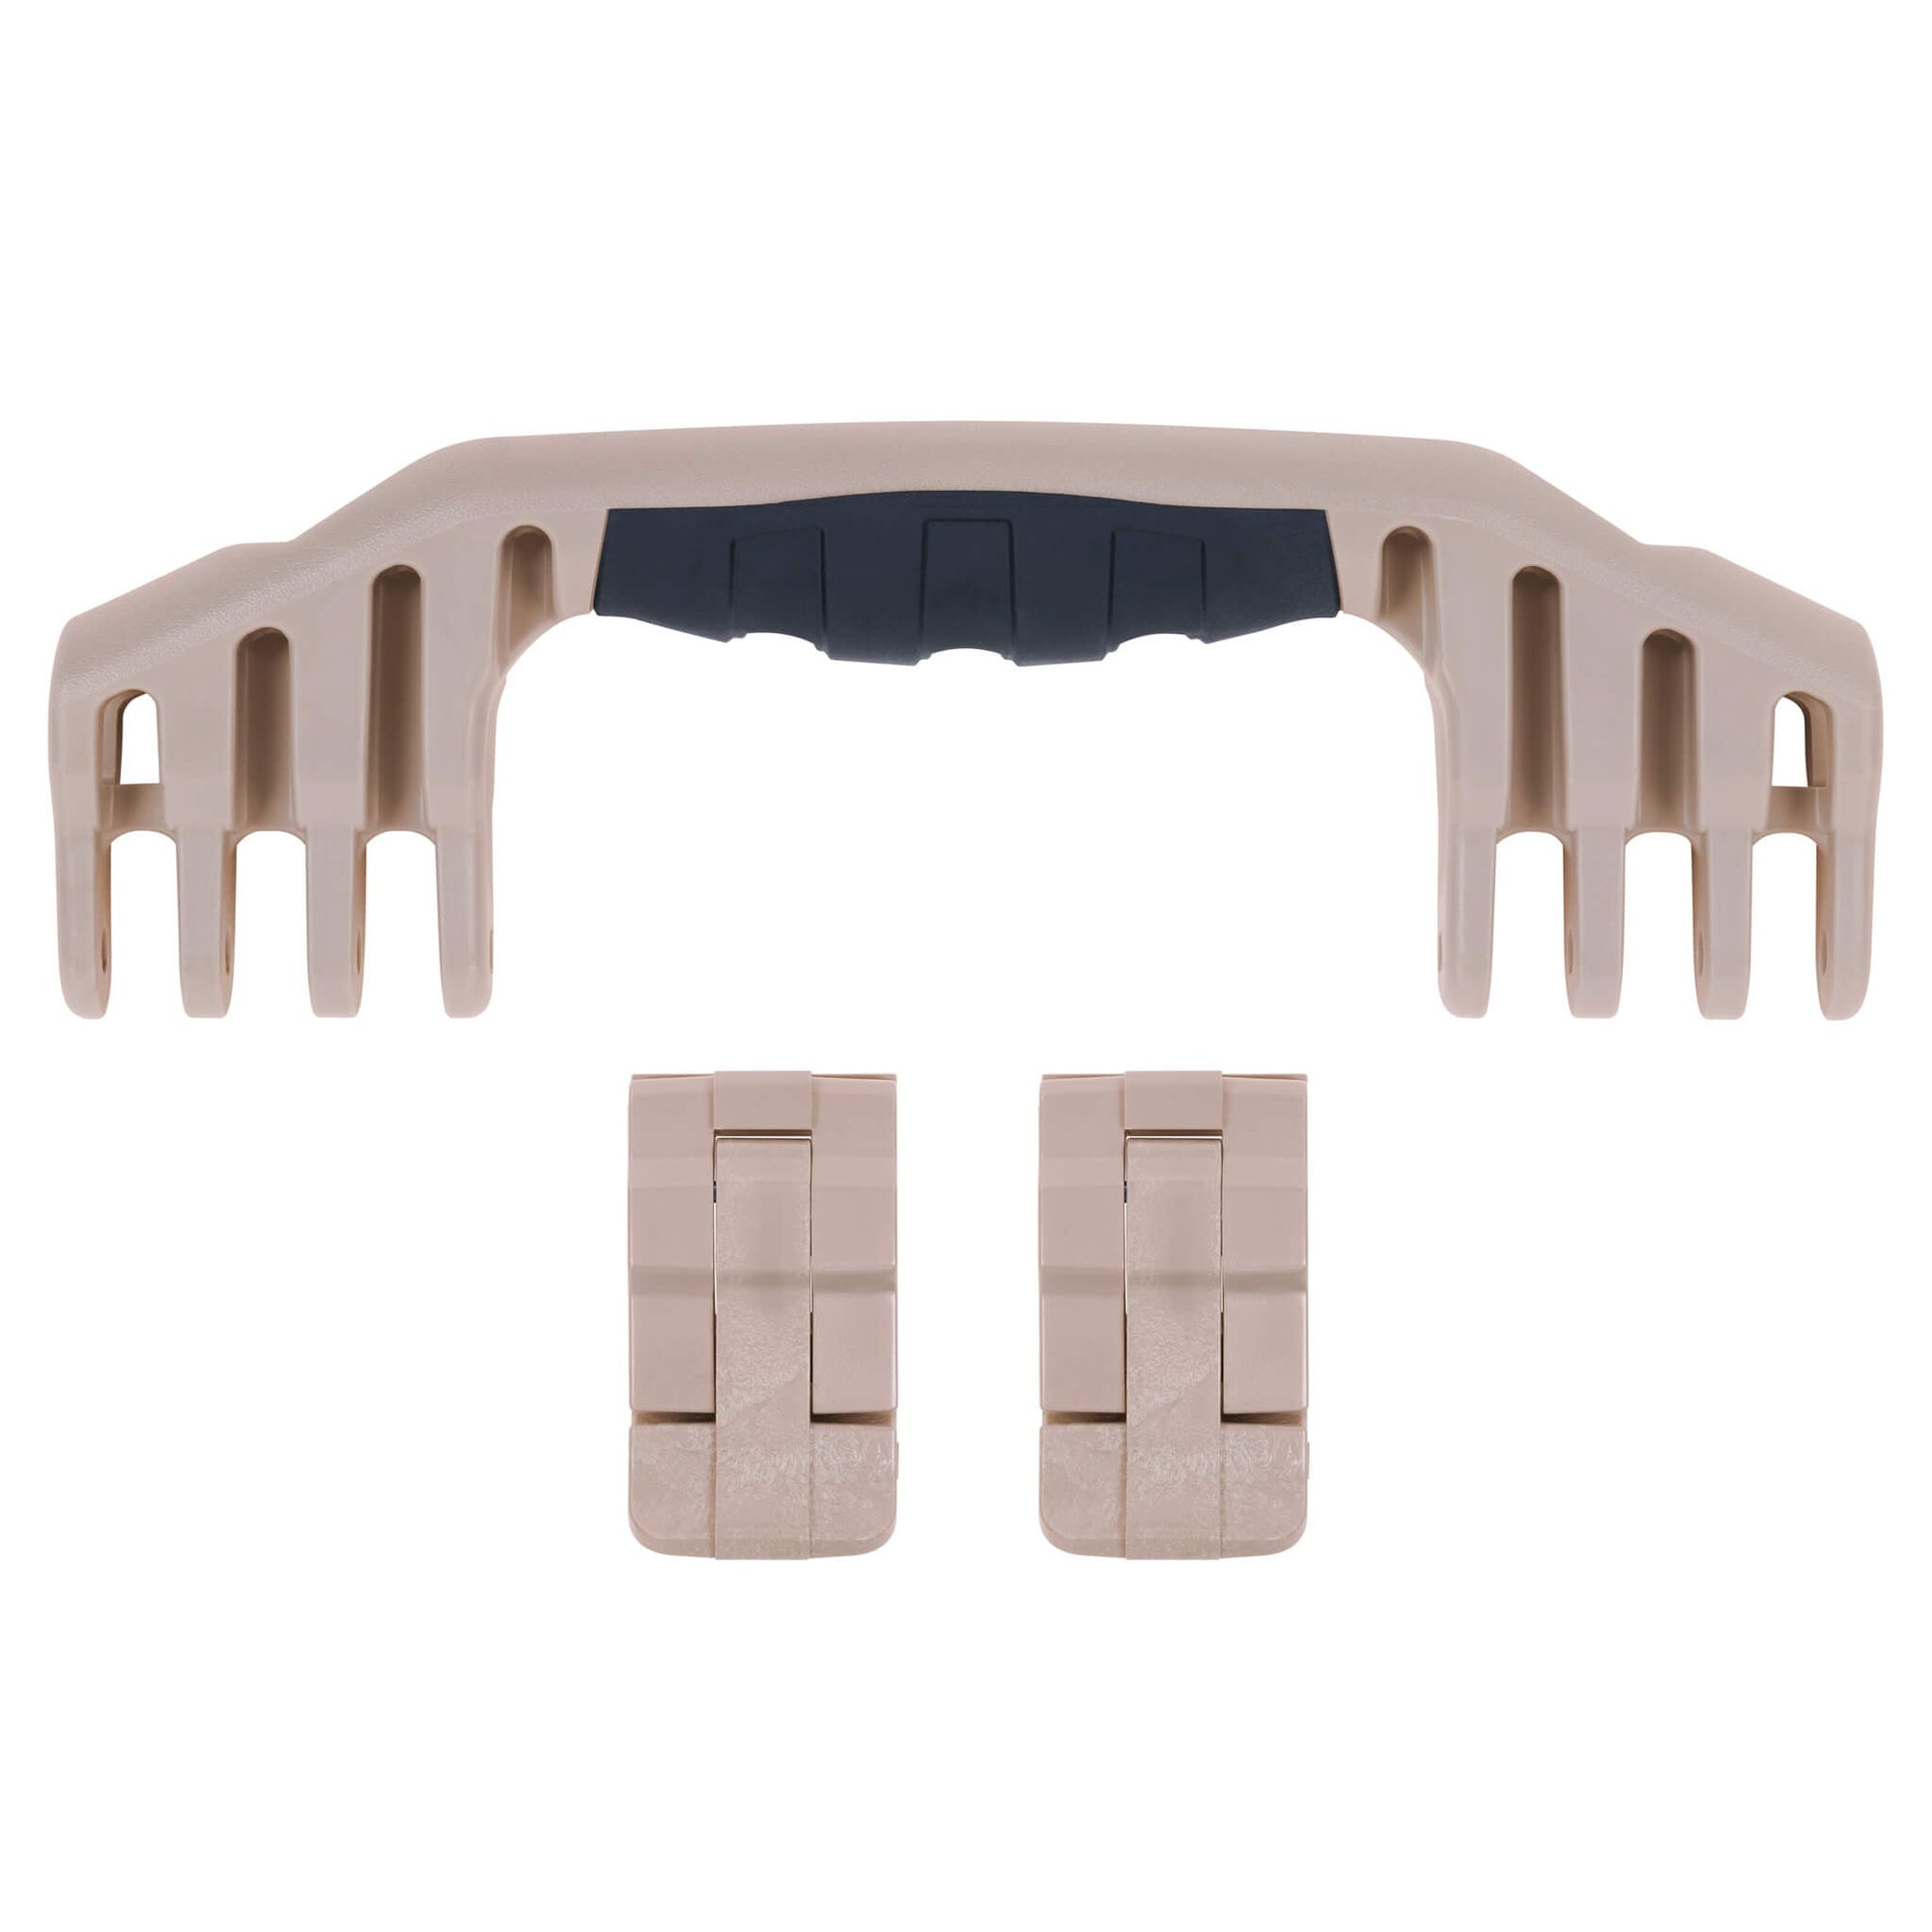 Pelican 1550 Replacement Handle & Latches, Desert Tan (Set of 1 Handle, 2 Latches) ColorCase 